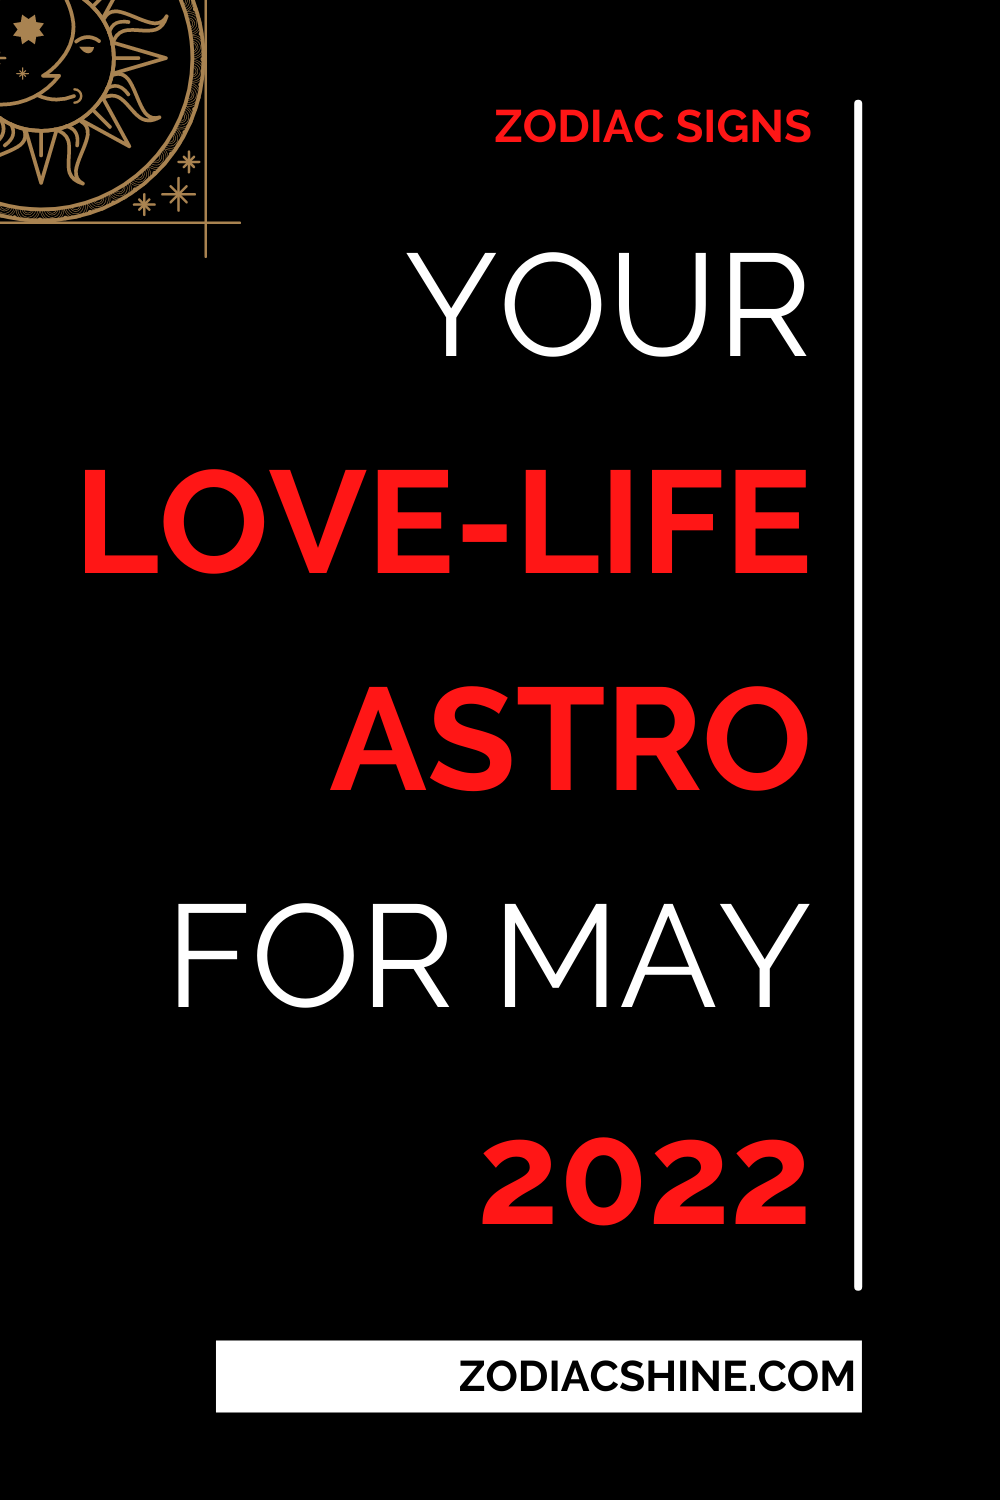 Your Love-Life Astro For May 2022